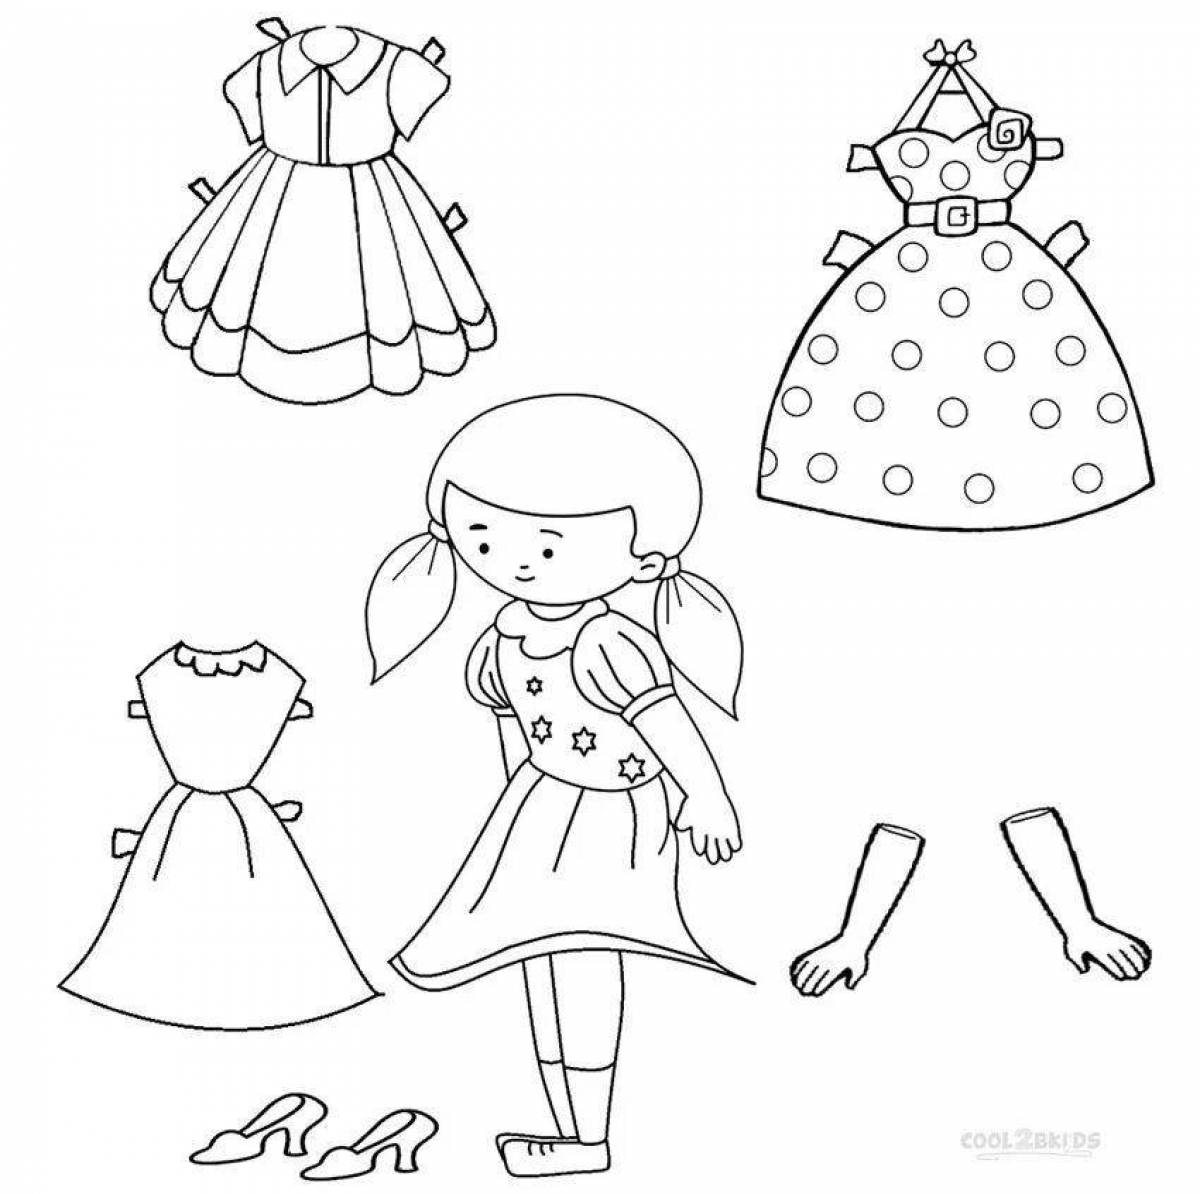 Fancy coloring doll for 2-3 year olds